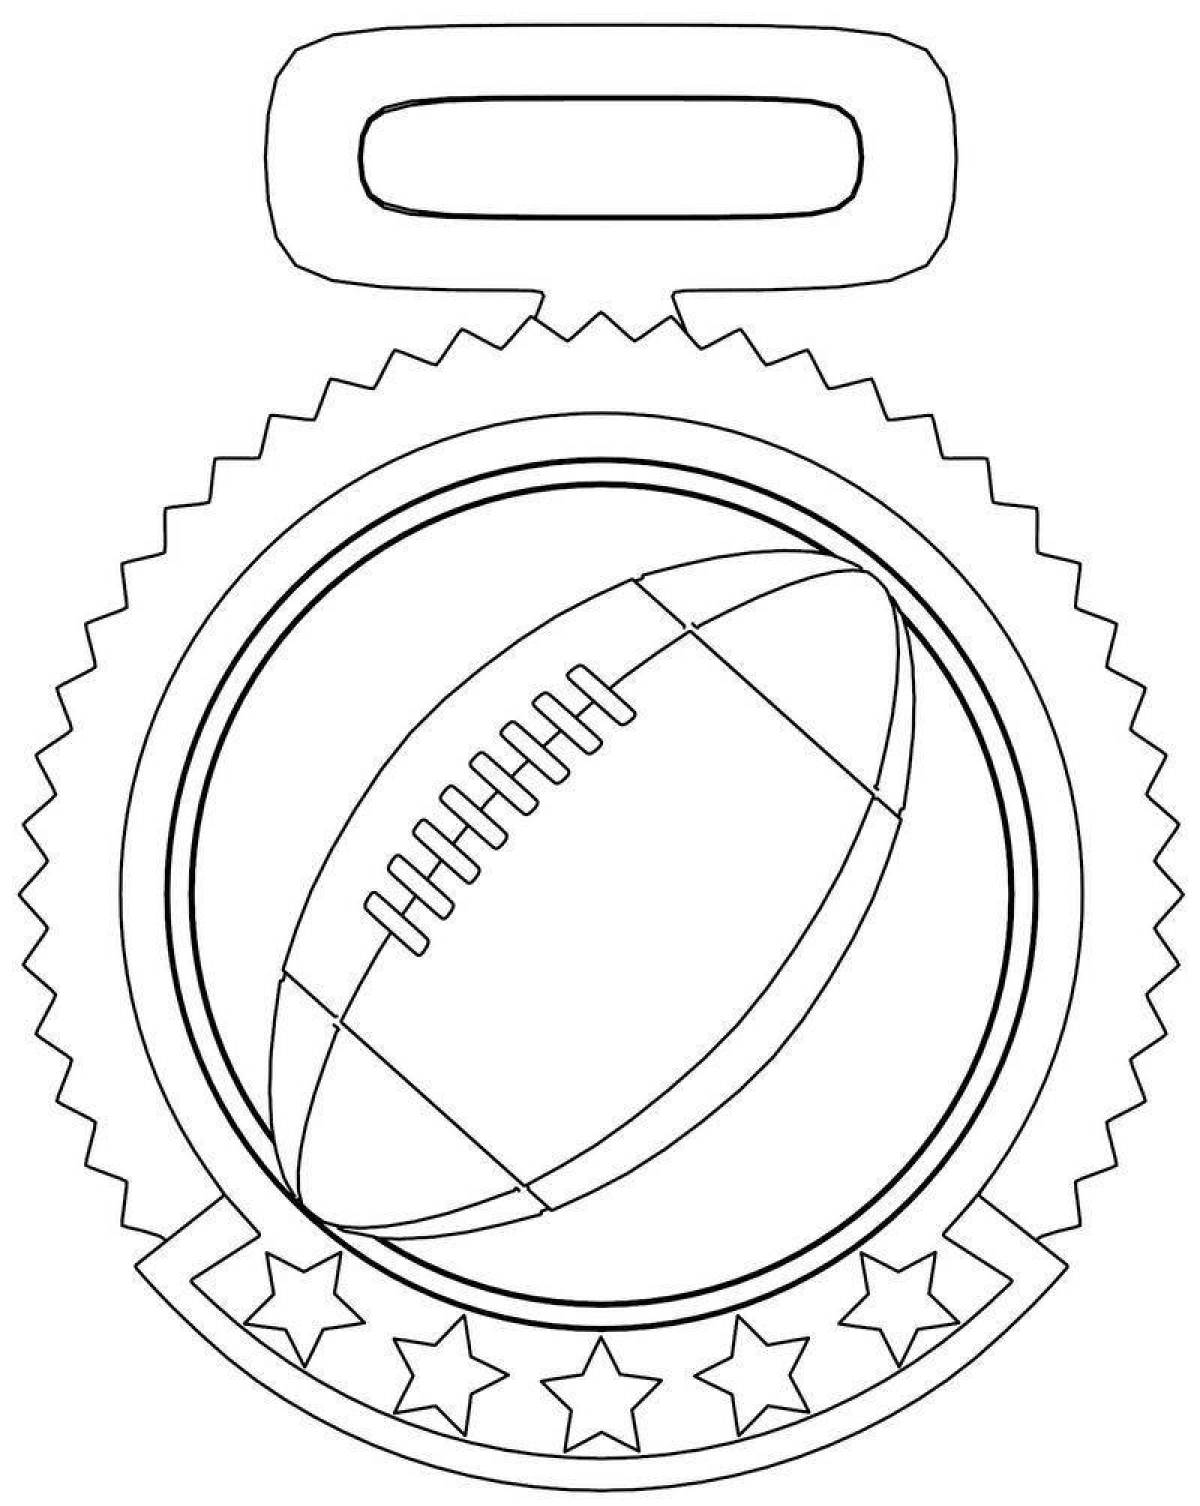 Tempting medal template for February 23rd